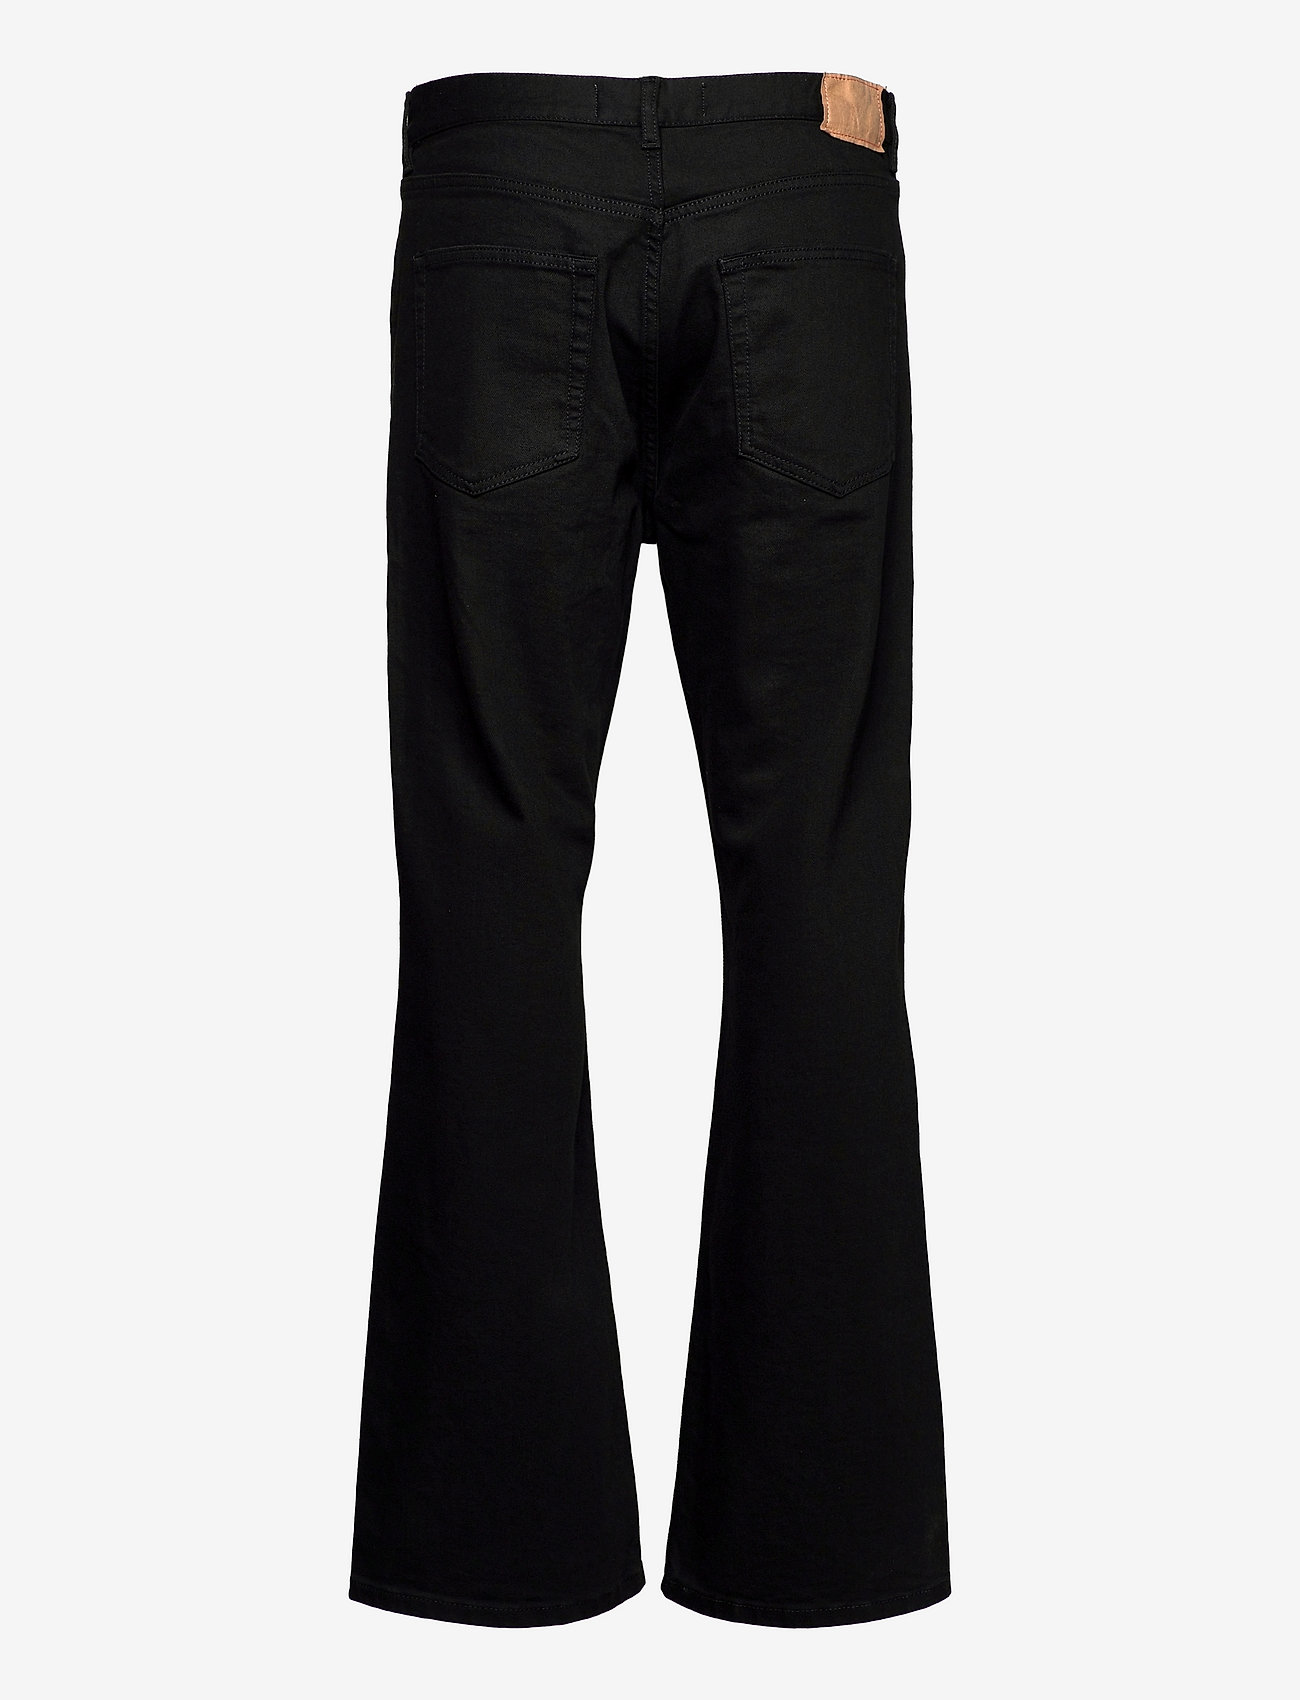 Jeanerica - PM007 Phoenix Jeans - relaxed jeans - rinse stay black - 1